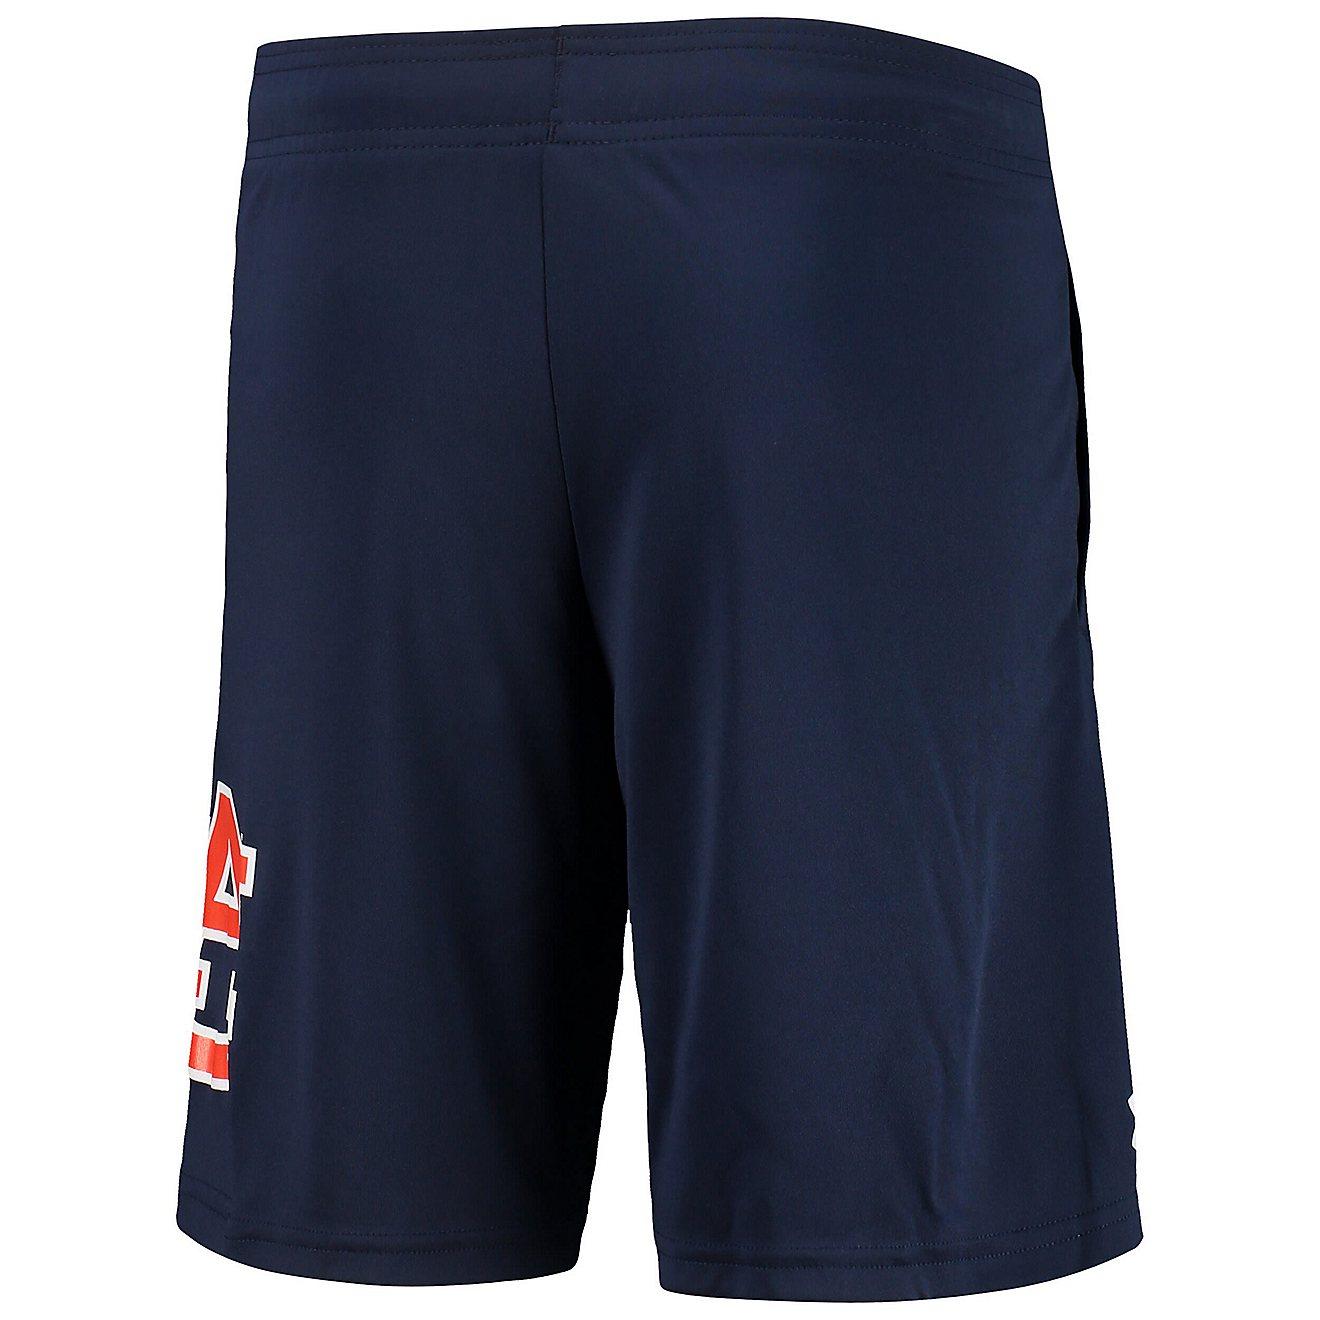 Youth Under Armour Auburn Tigers Tech Shorts                                                                                     - view number 3